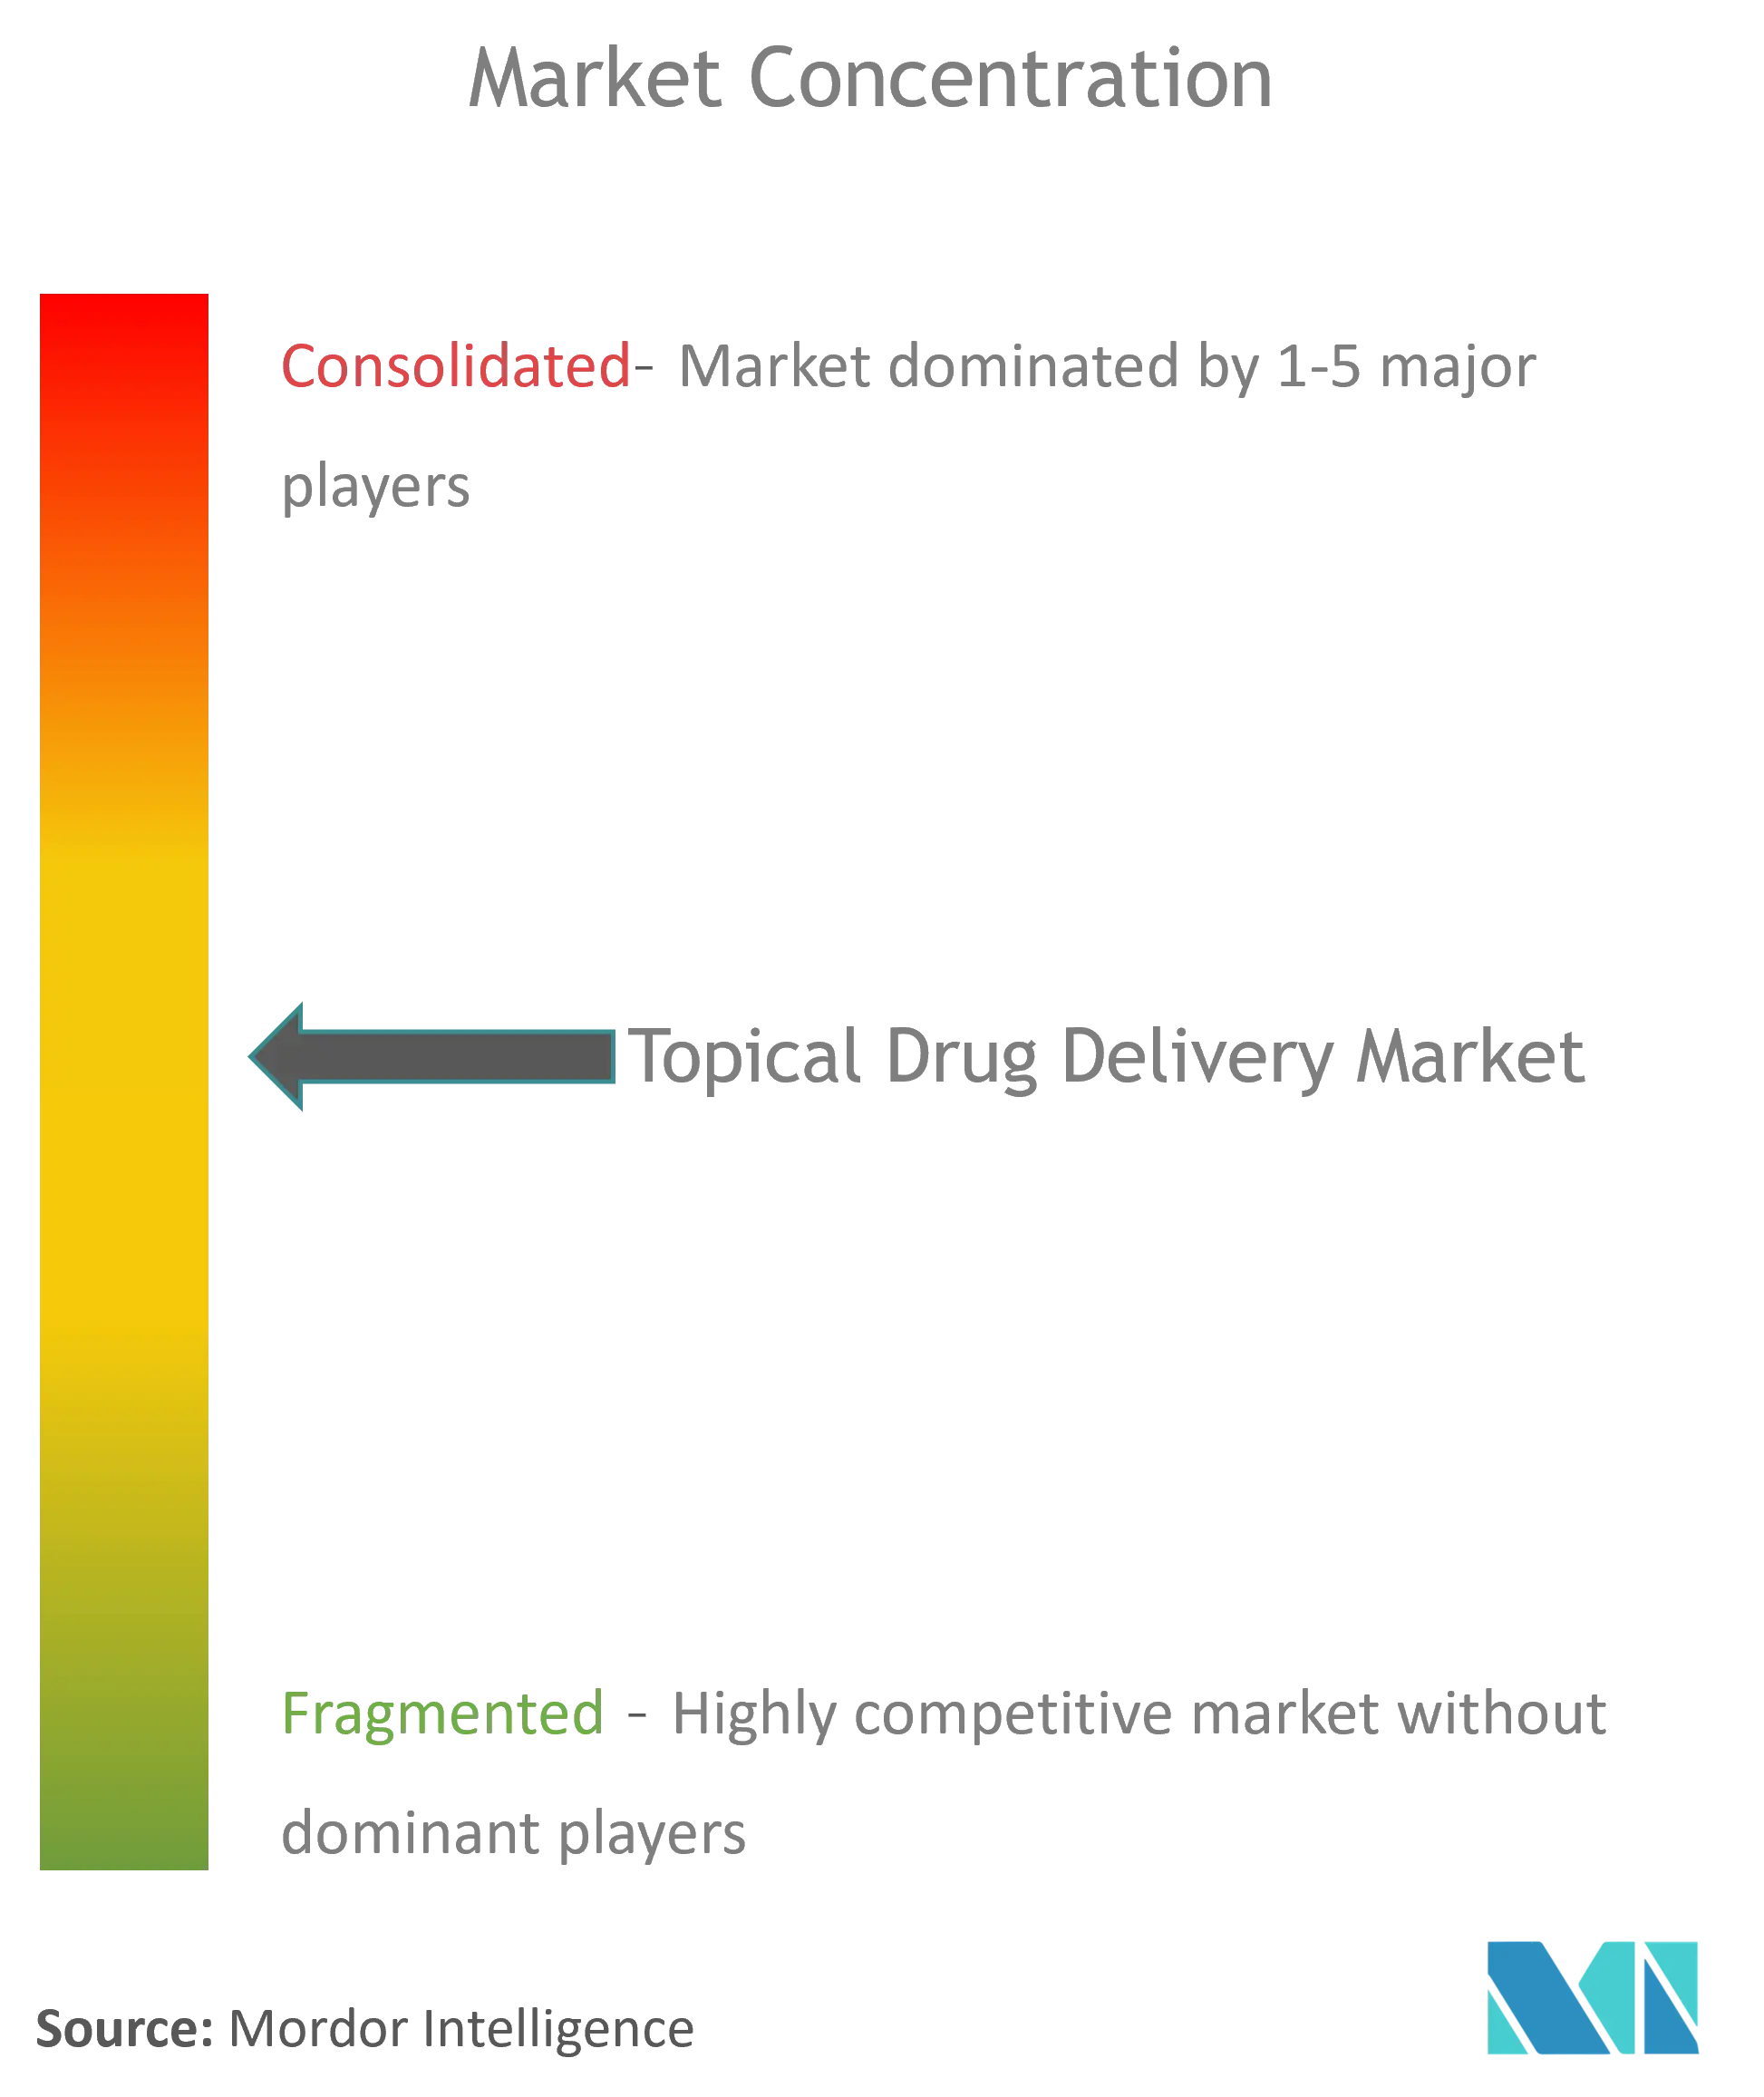 Topical drug Delivery Market - CL.png